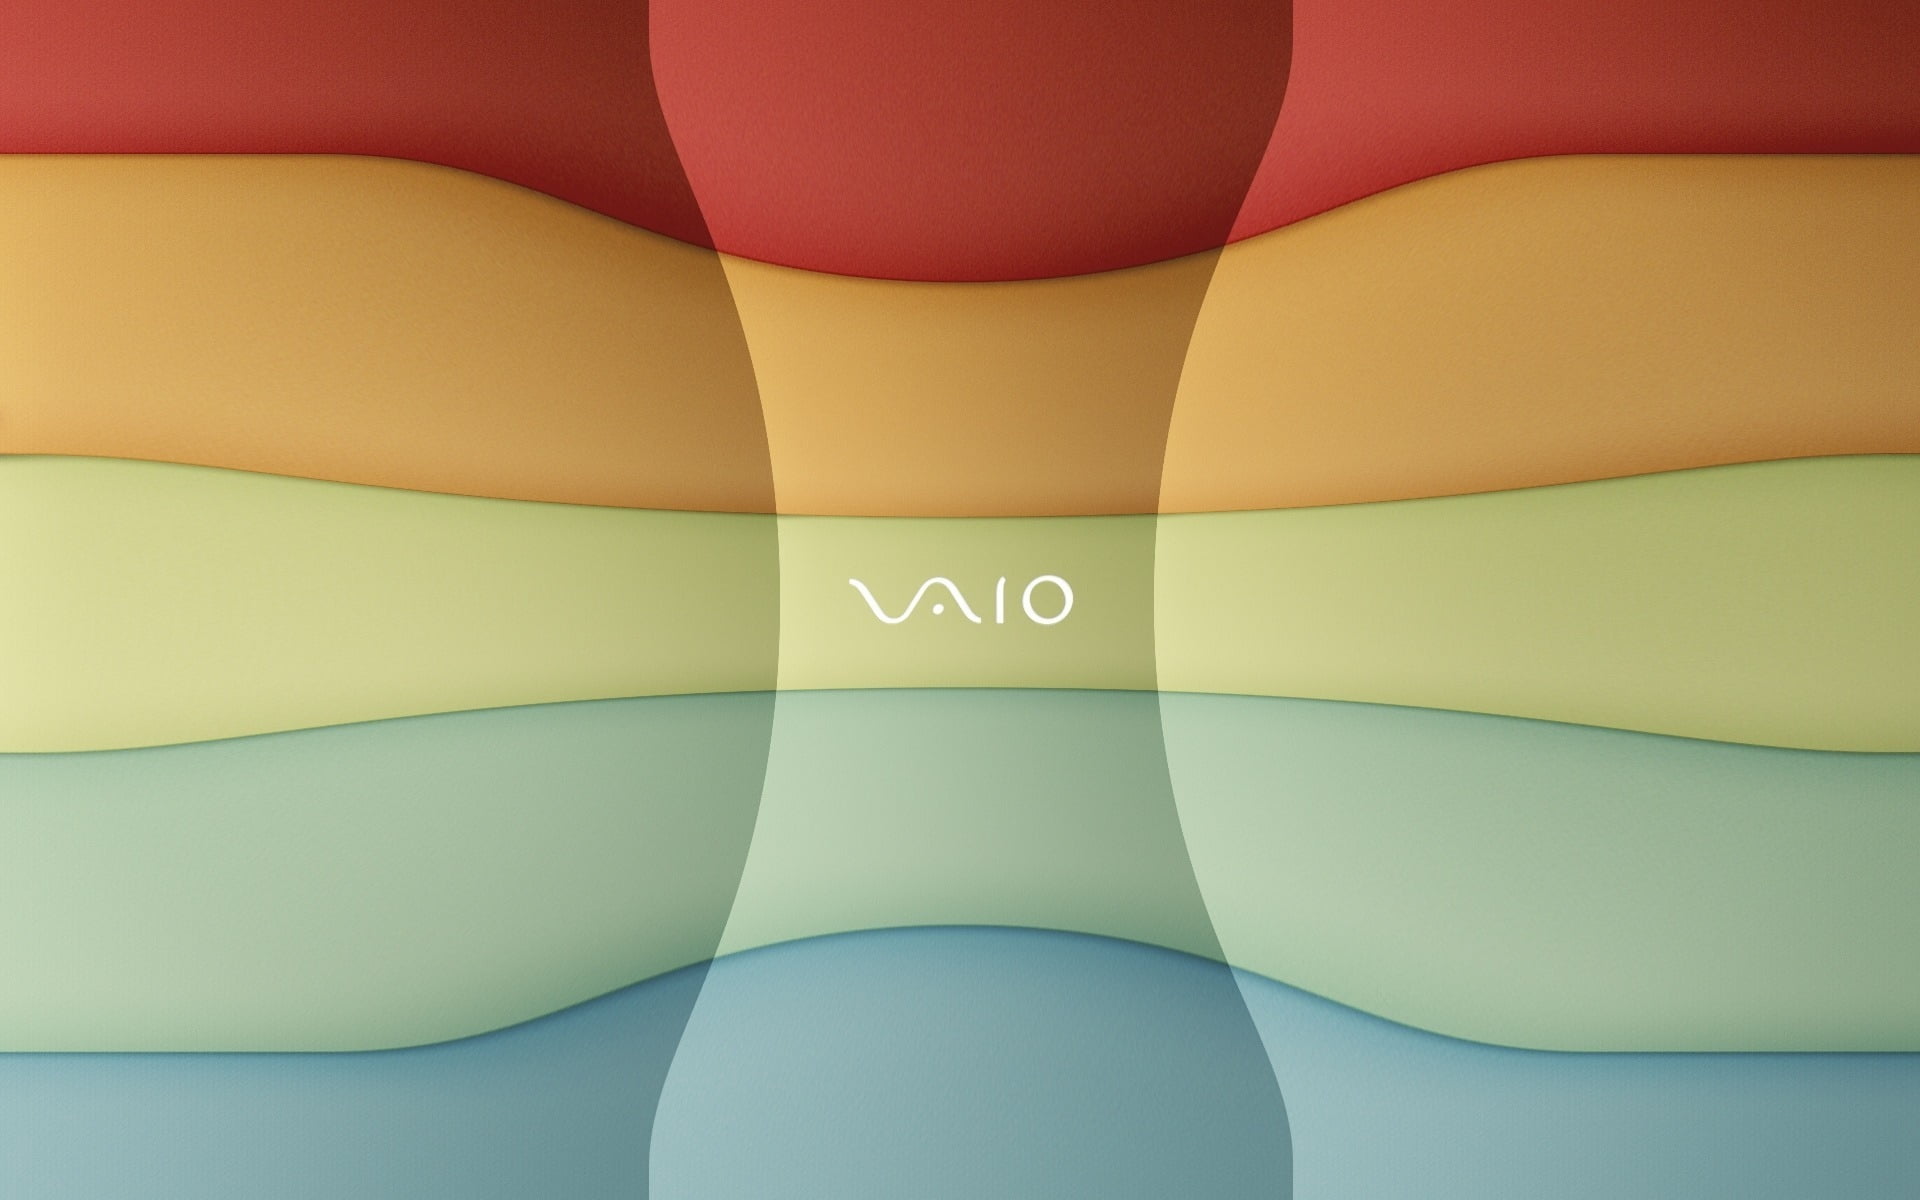 Sony VAIO logo, wave, system, computer, backgrounds, vector, illustration